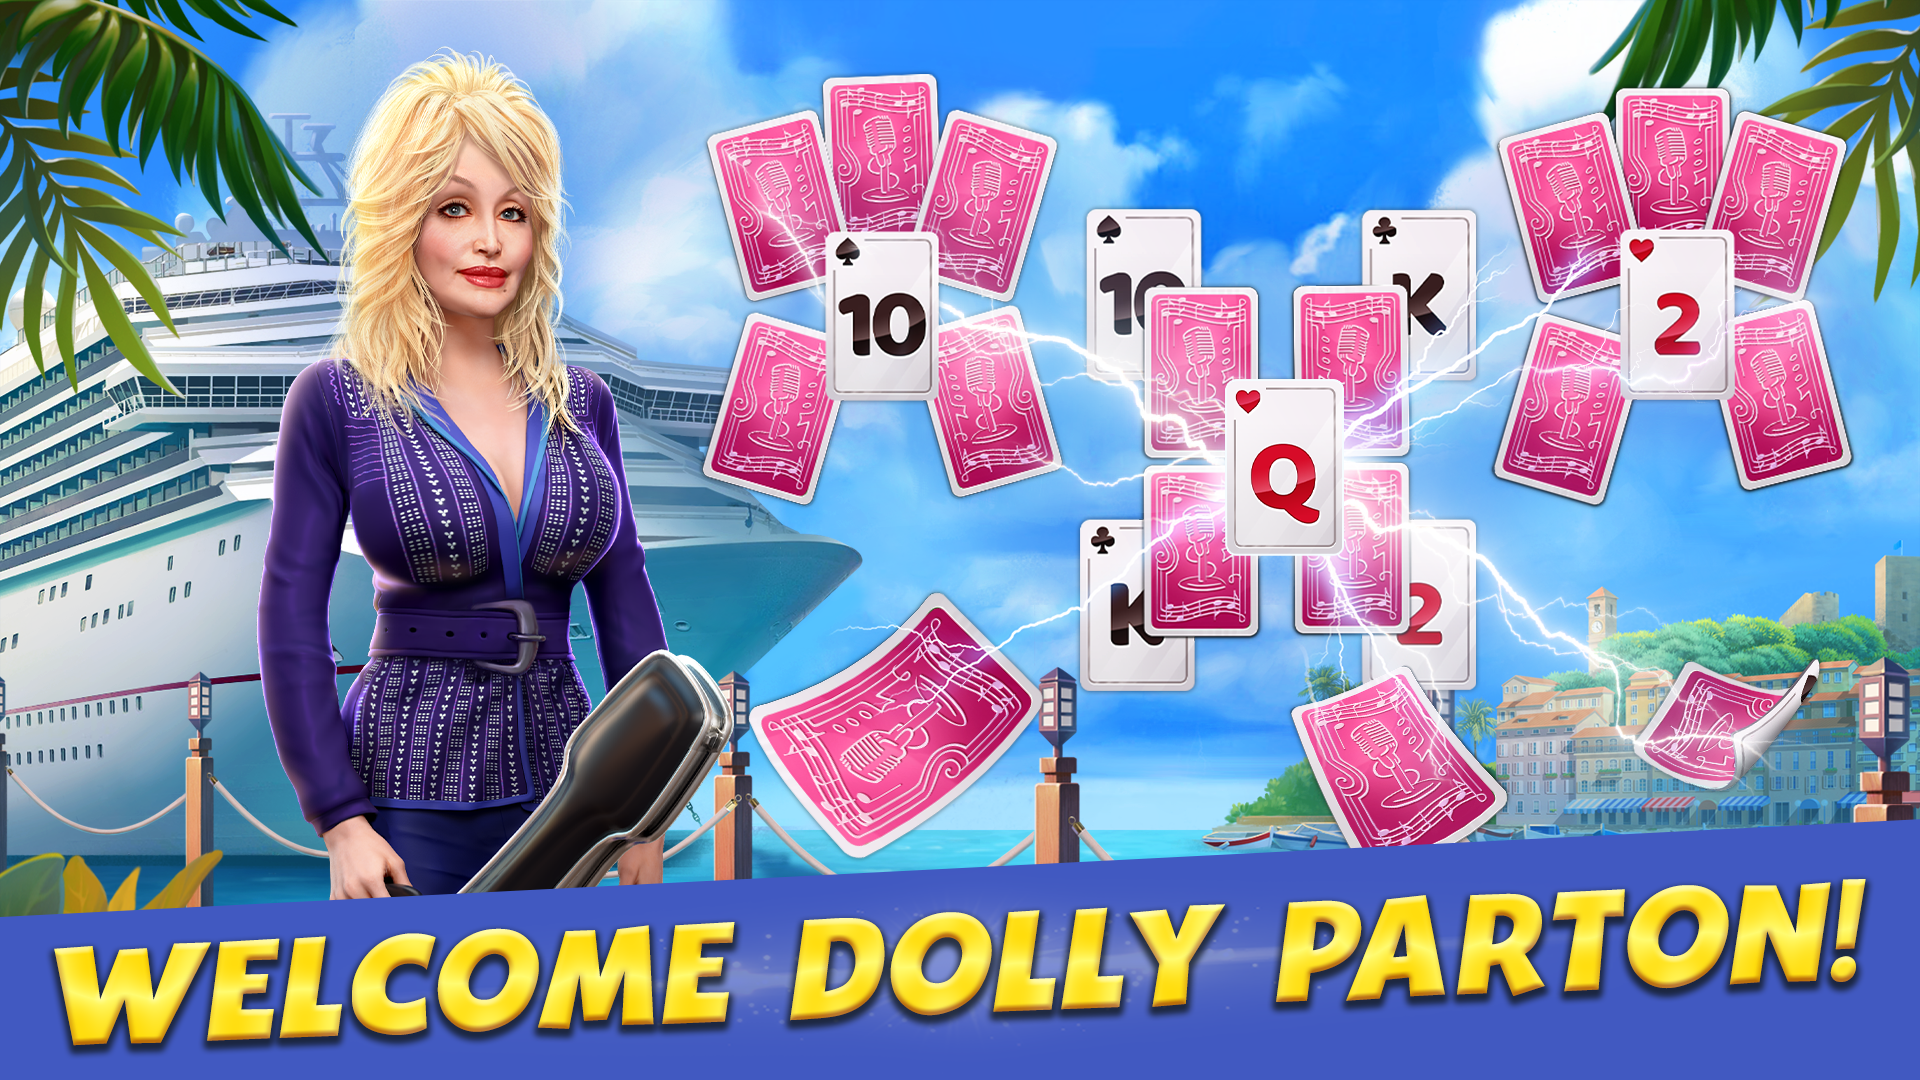 Dolly Parton Joins Belka Games On Board Solitaire Cruise